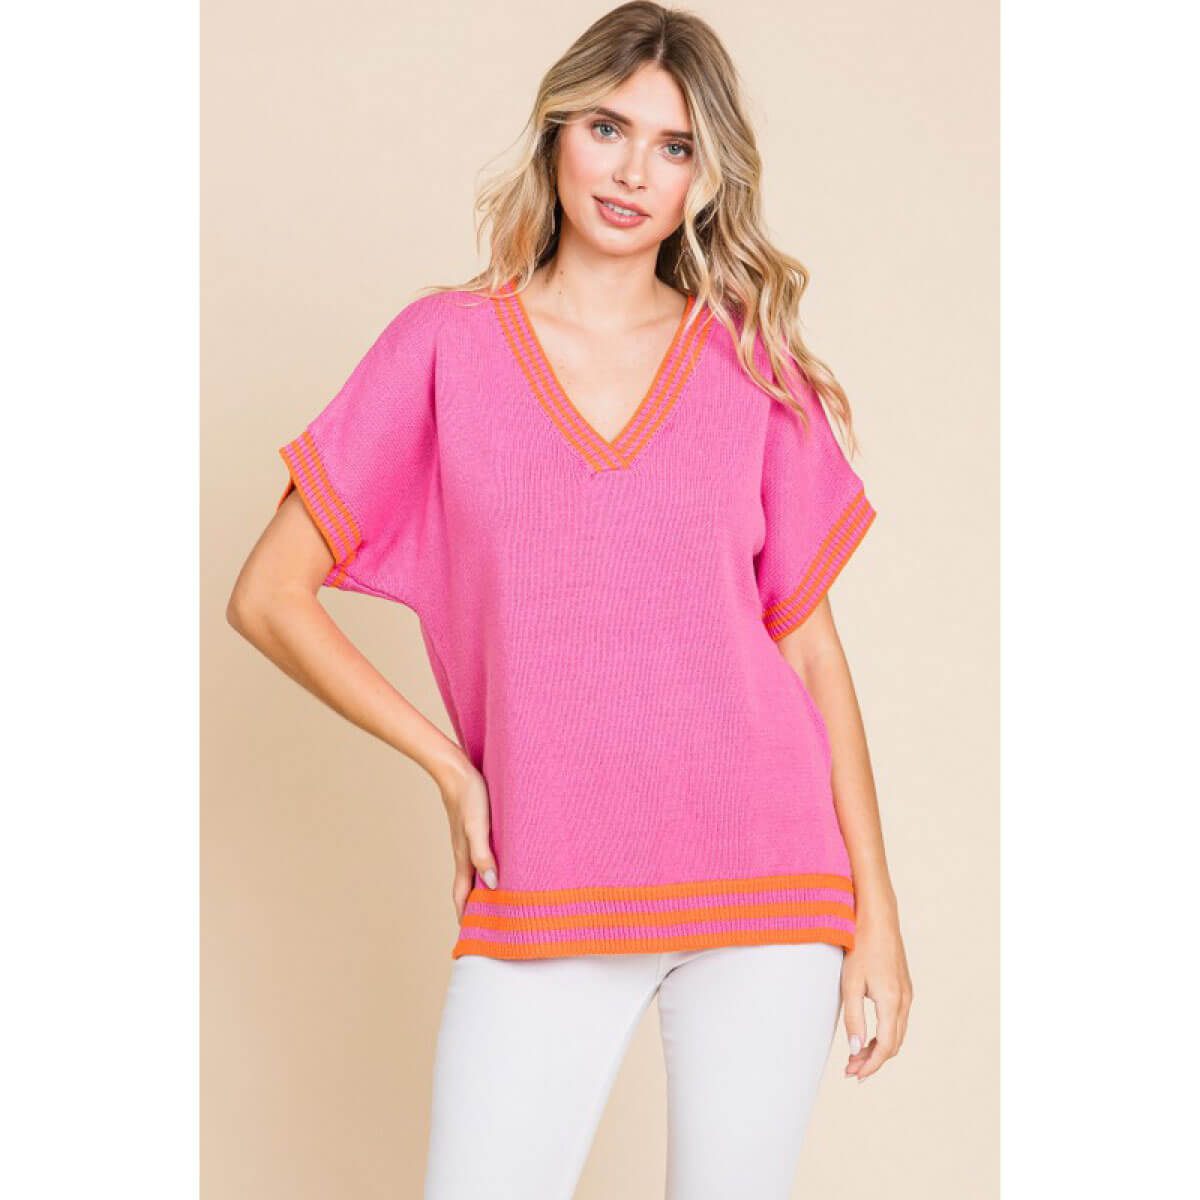 Solid Knit Top with Striped Hemline pink front | MILK MONEY milkmoney.co | cute tops for women. trendy tops for women. cute blouses for women. stylish tops for women. pretty womens tops.